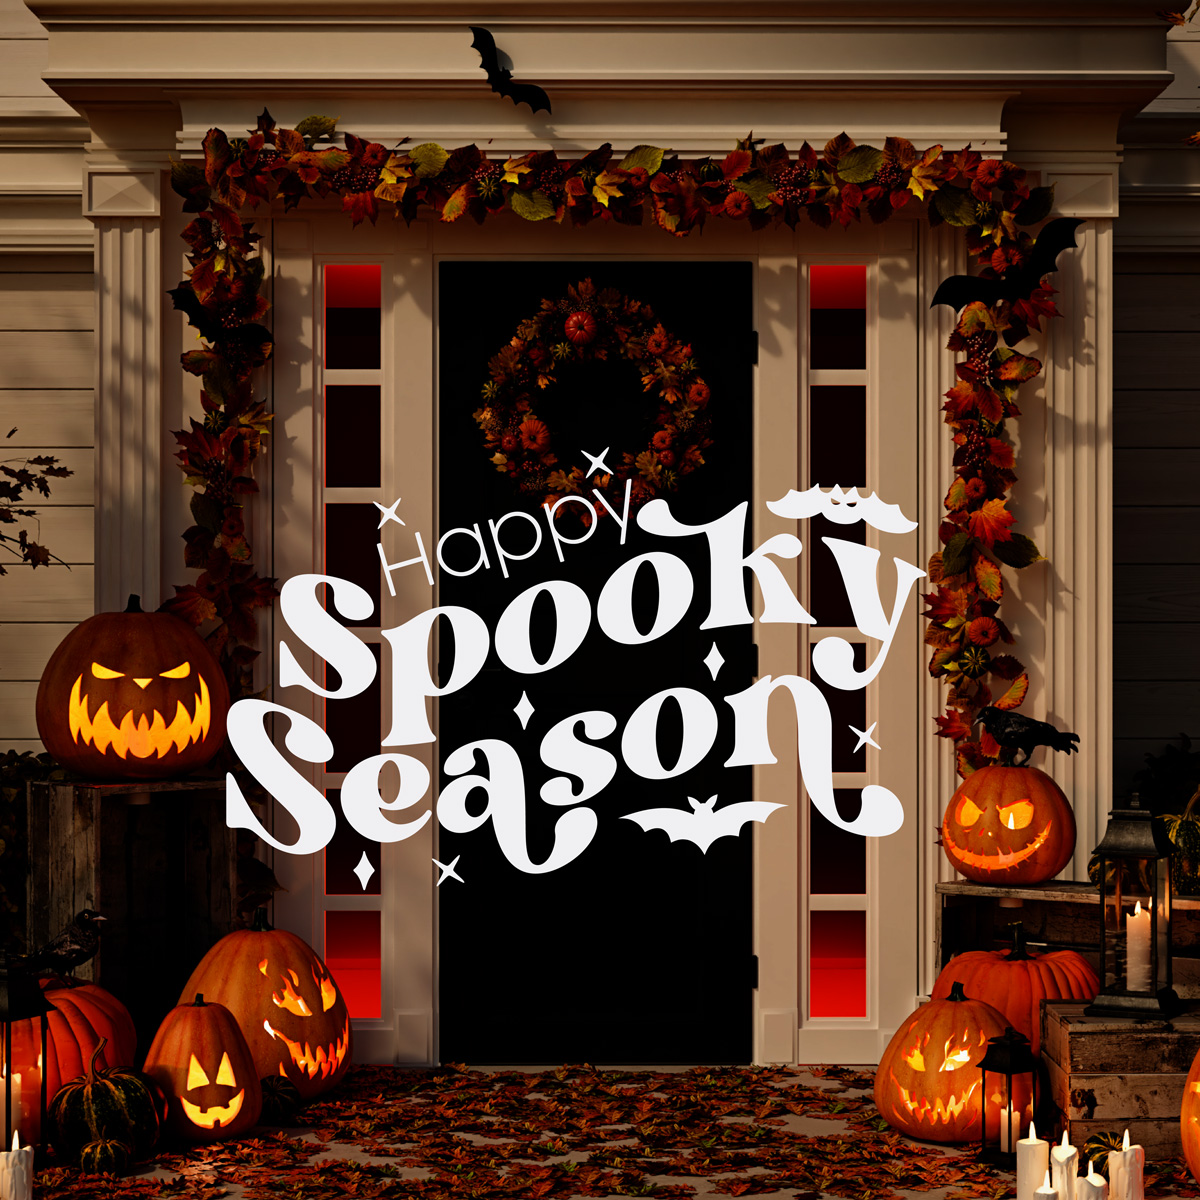 From our team to yours, Happy Spooky Season! #fall #happyspookyseason #spookyseason #halloween #mortgageloan #firsttimehomebuyer #Washingtonhomebuying #texashomebuyer #homeloan